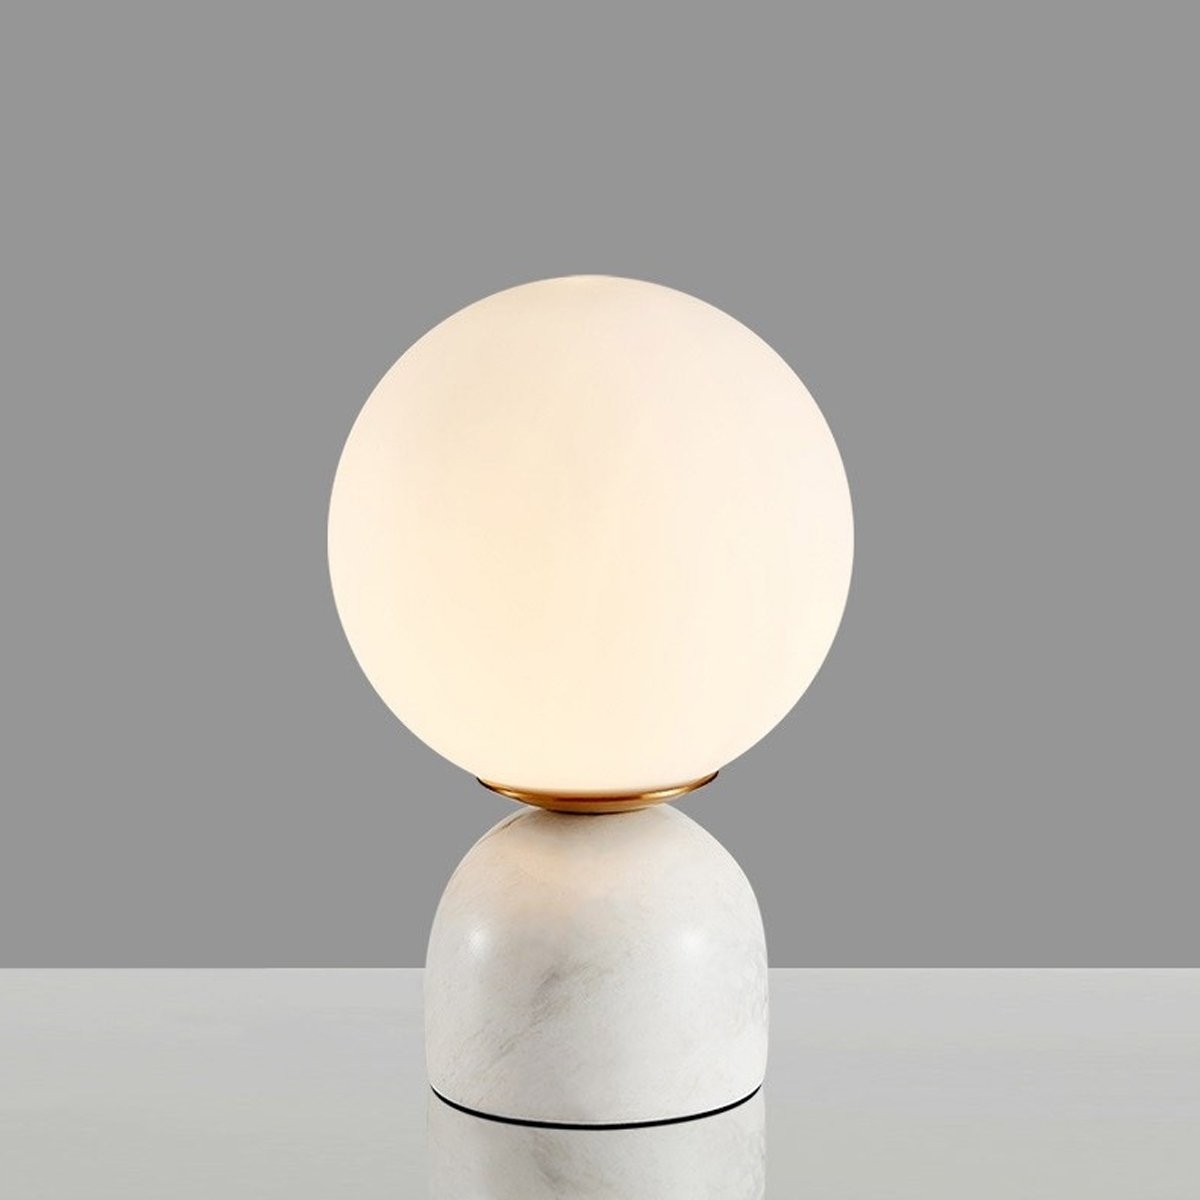 Marble Globe table light in Black or White Art Deco White Base – Table Lamp – CGC Retail Outlet